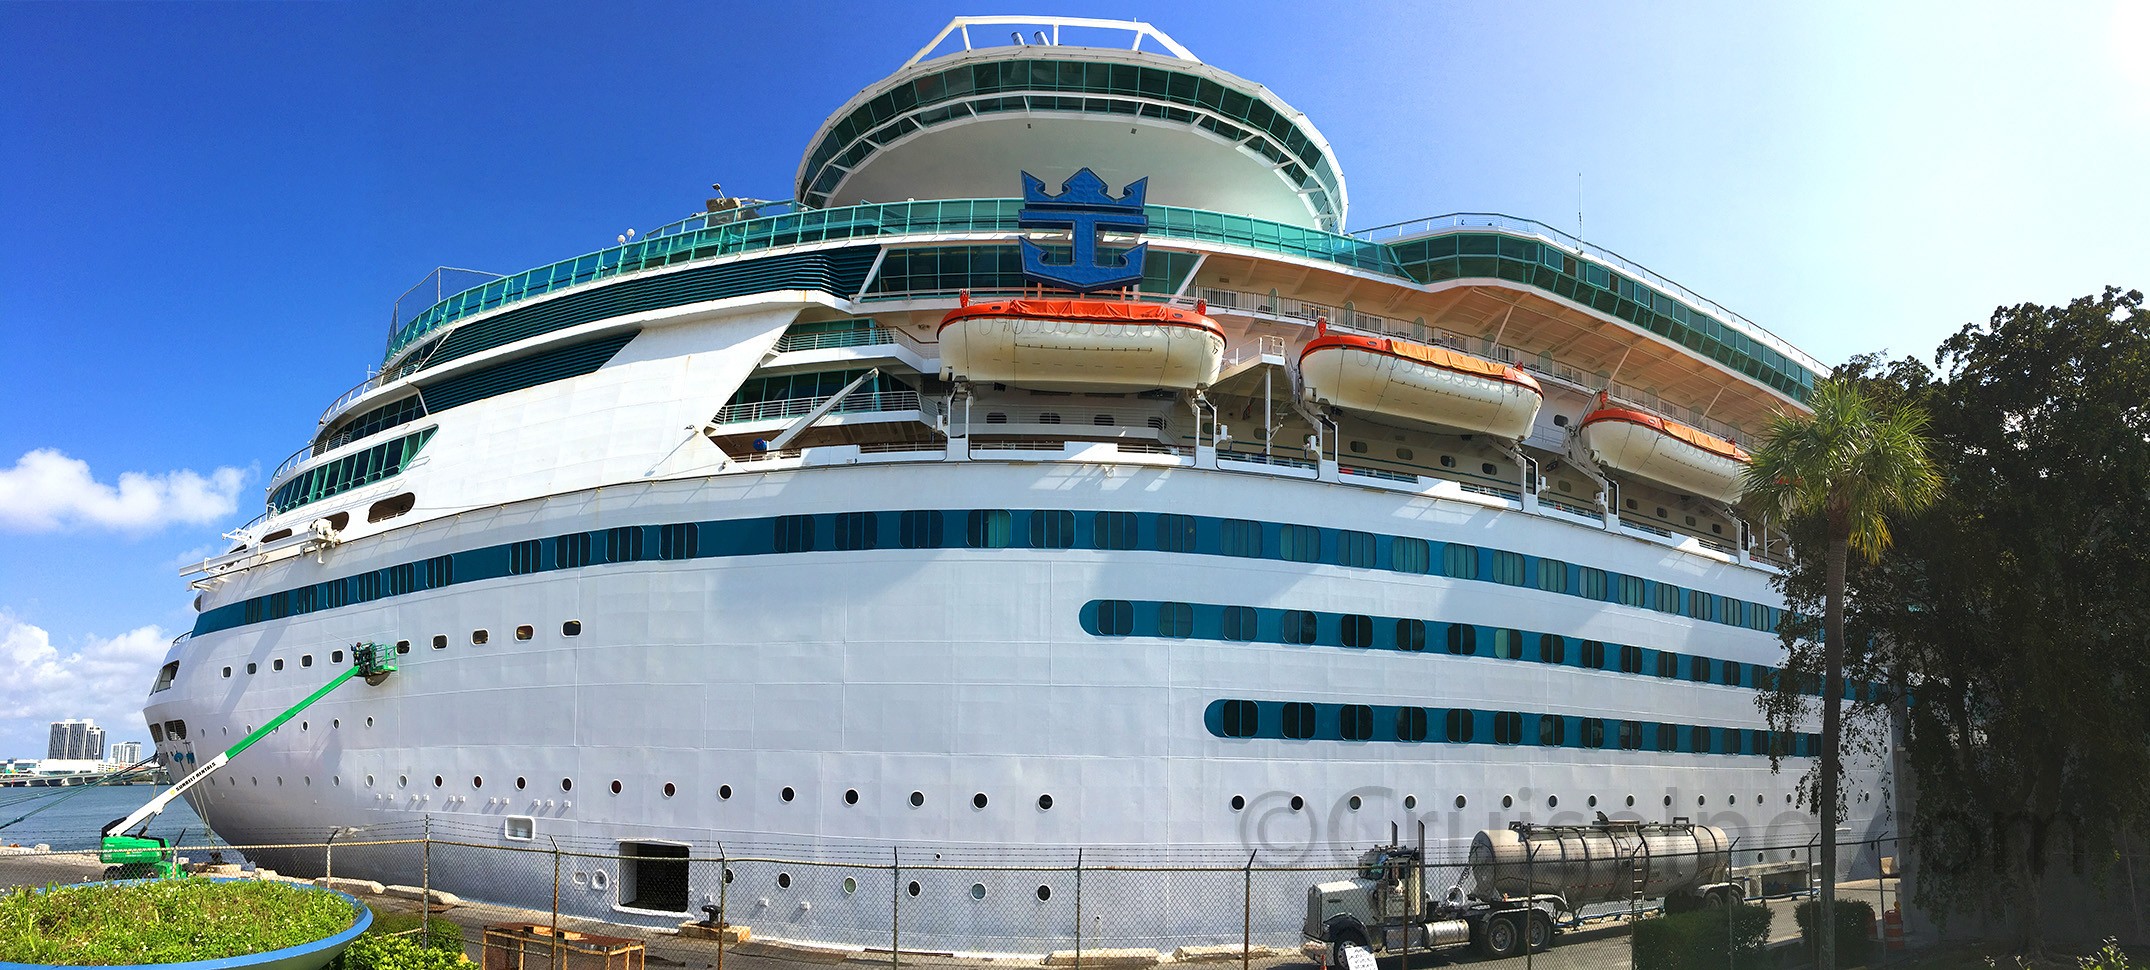 Majesty of the Seas to Leave Royal Caribbean's Fleet | CruiseInd